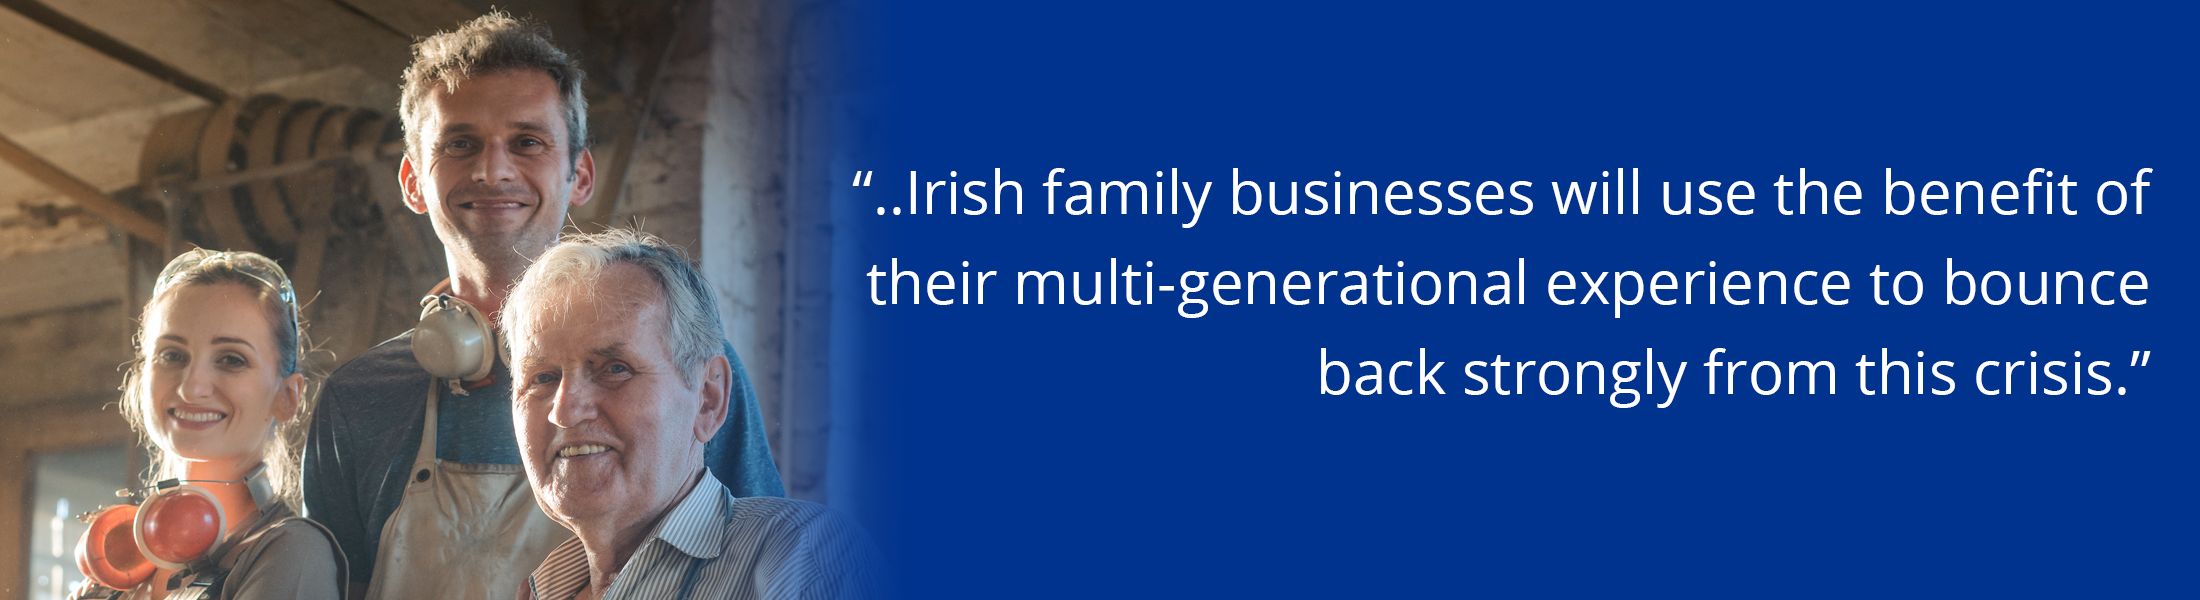 Image of family business generations, with text overlaid, "Irish family businesses will use the benefit of their multi-generational experience to bounce back strongly from this crisis"